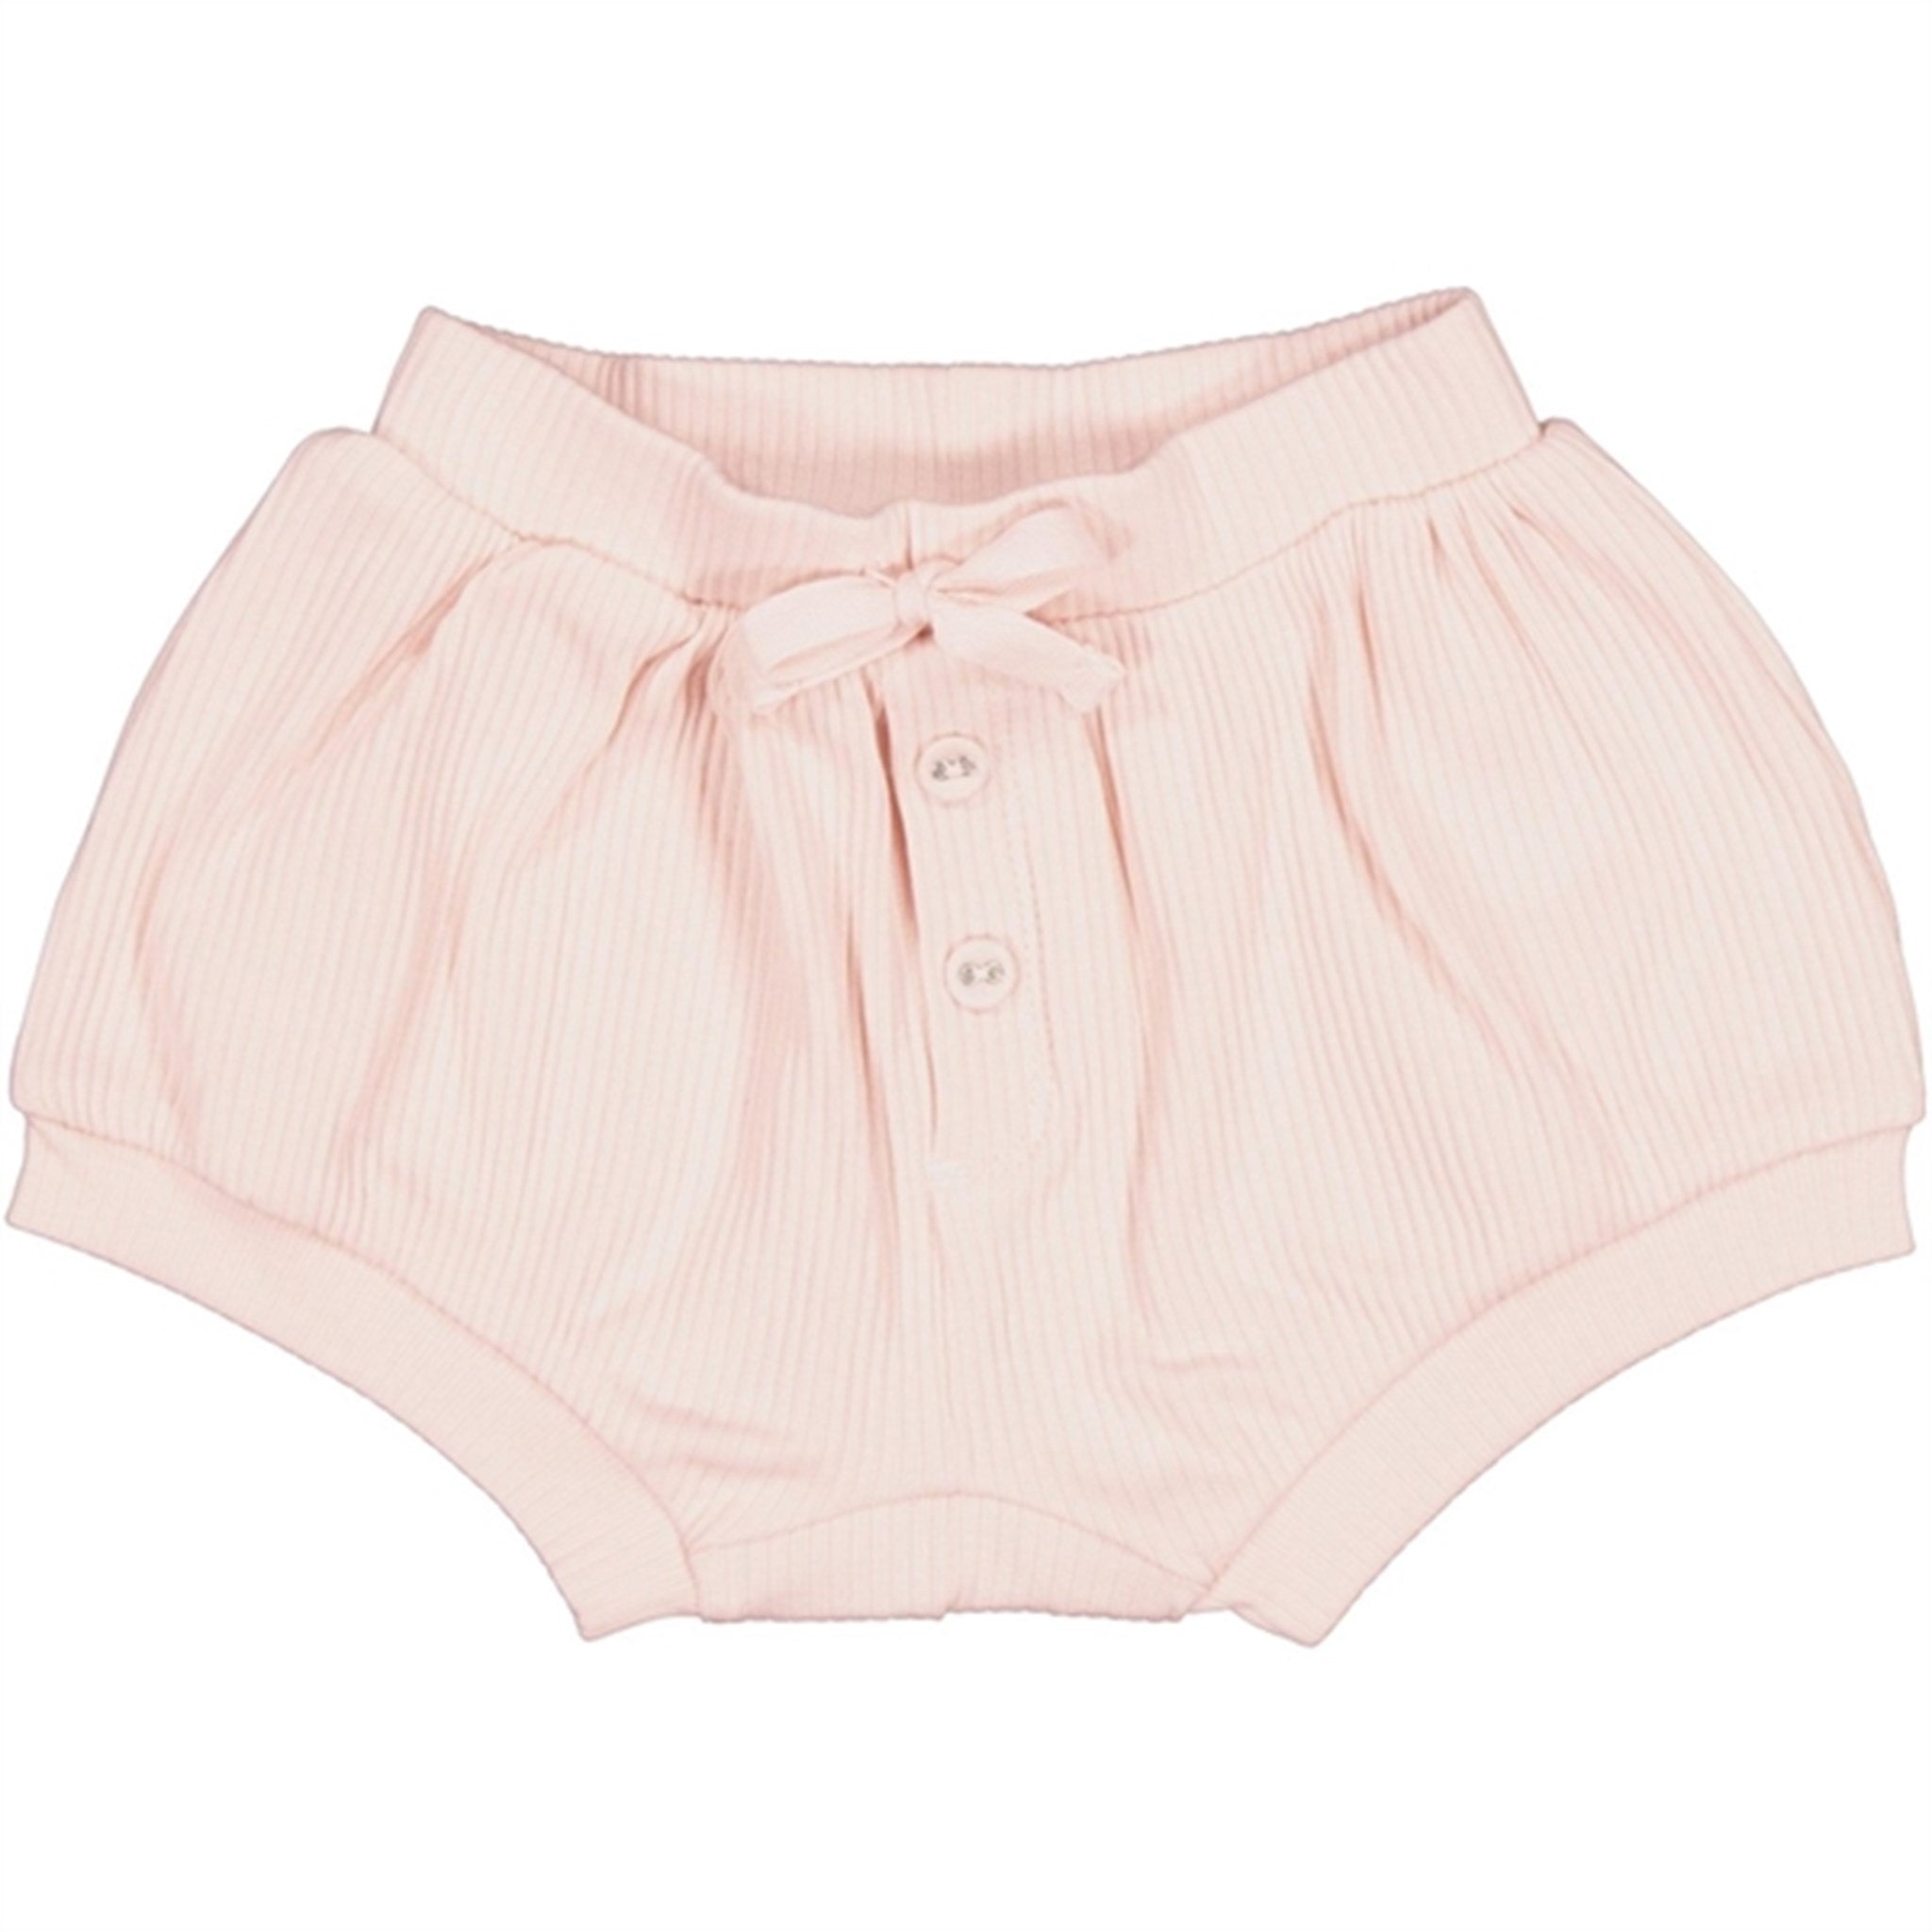 MarMar Modal Barely Rose Bloomers